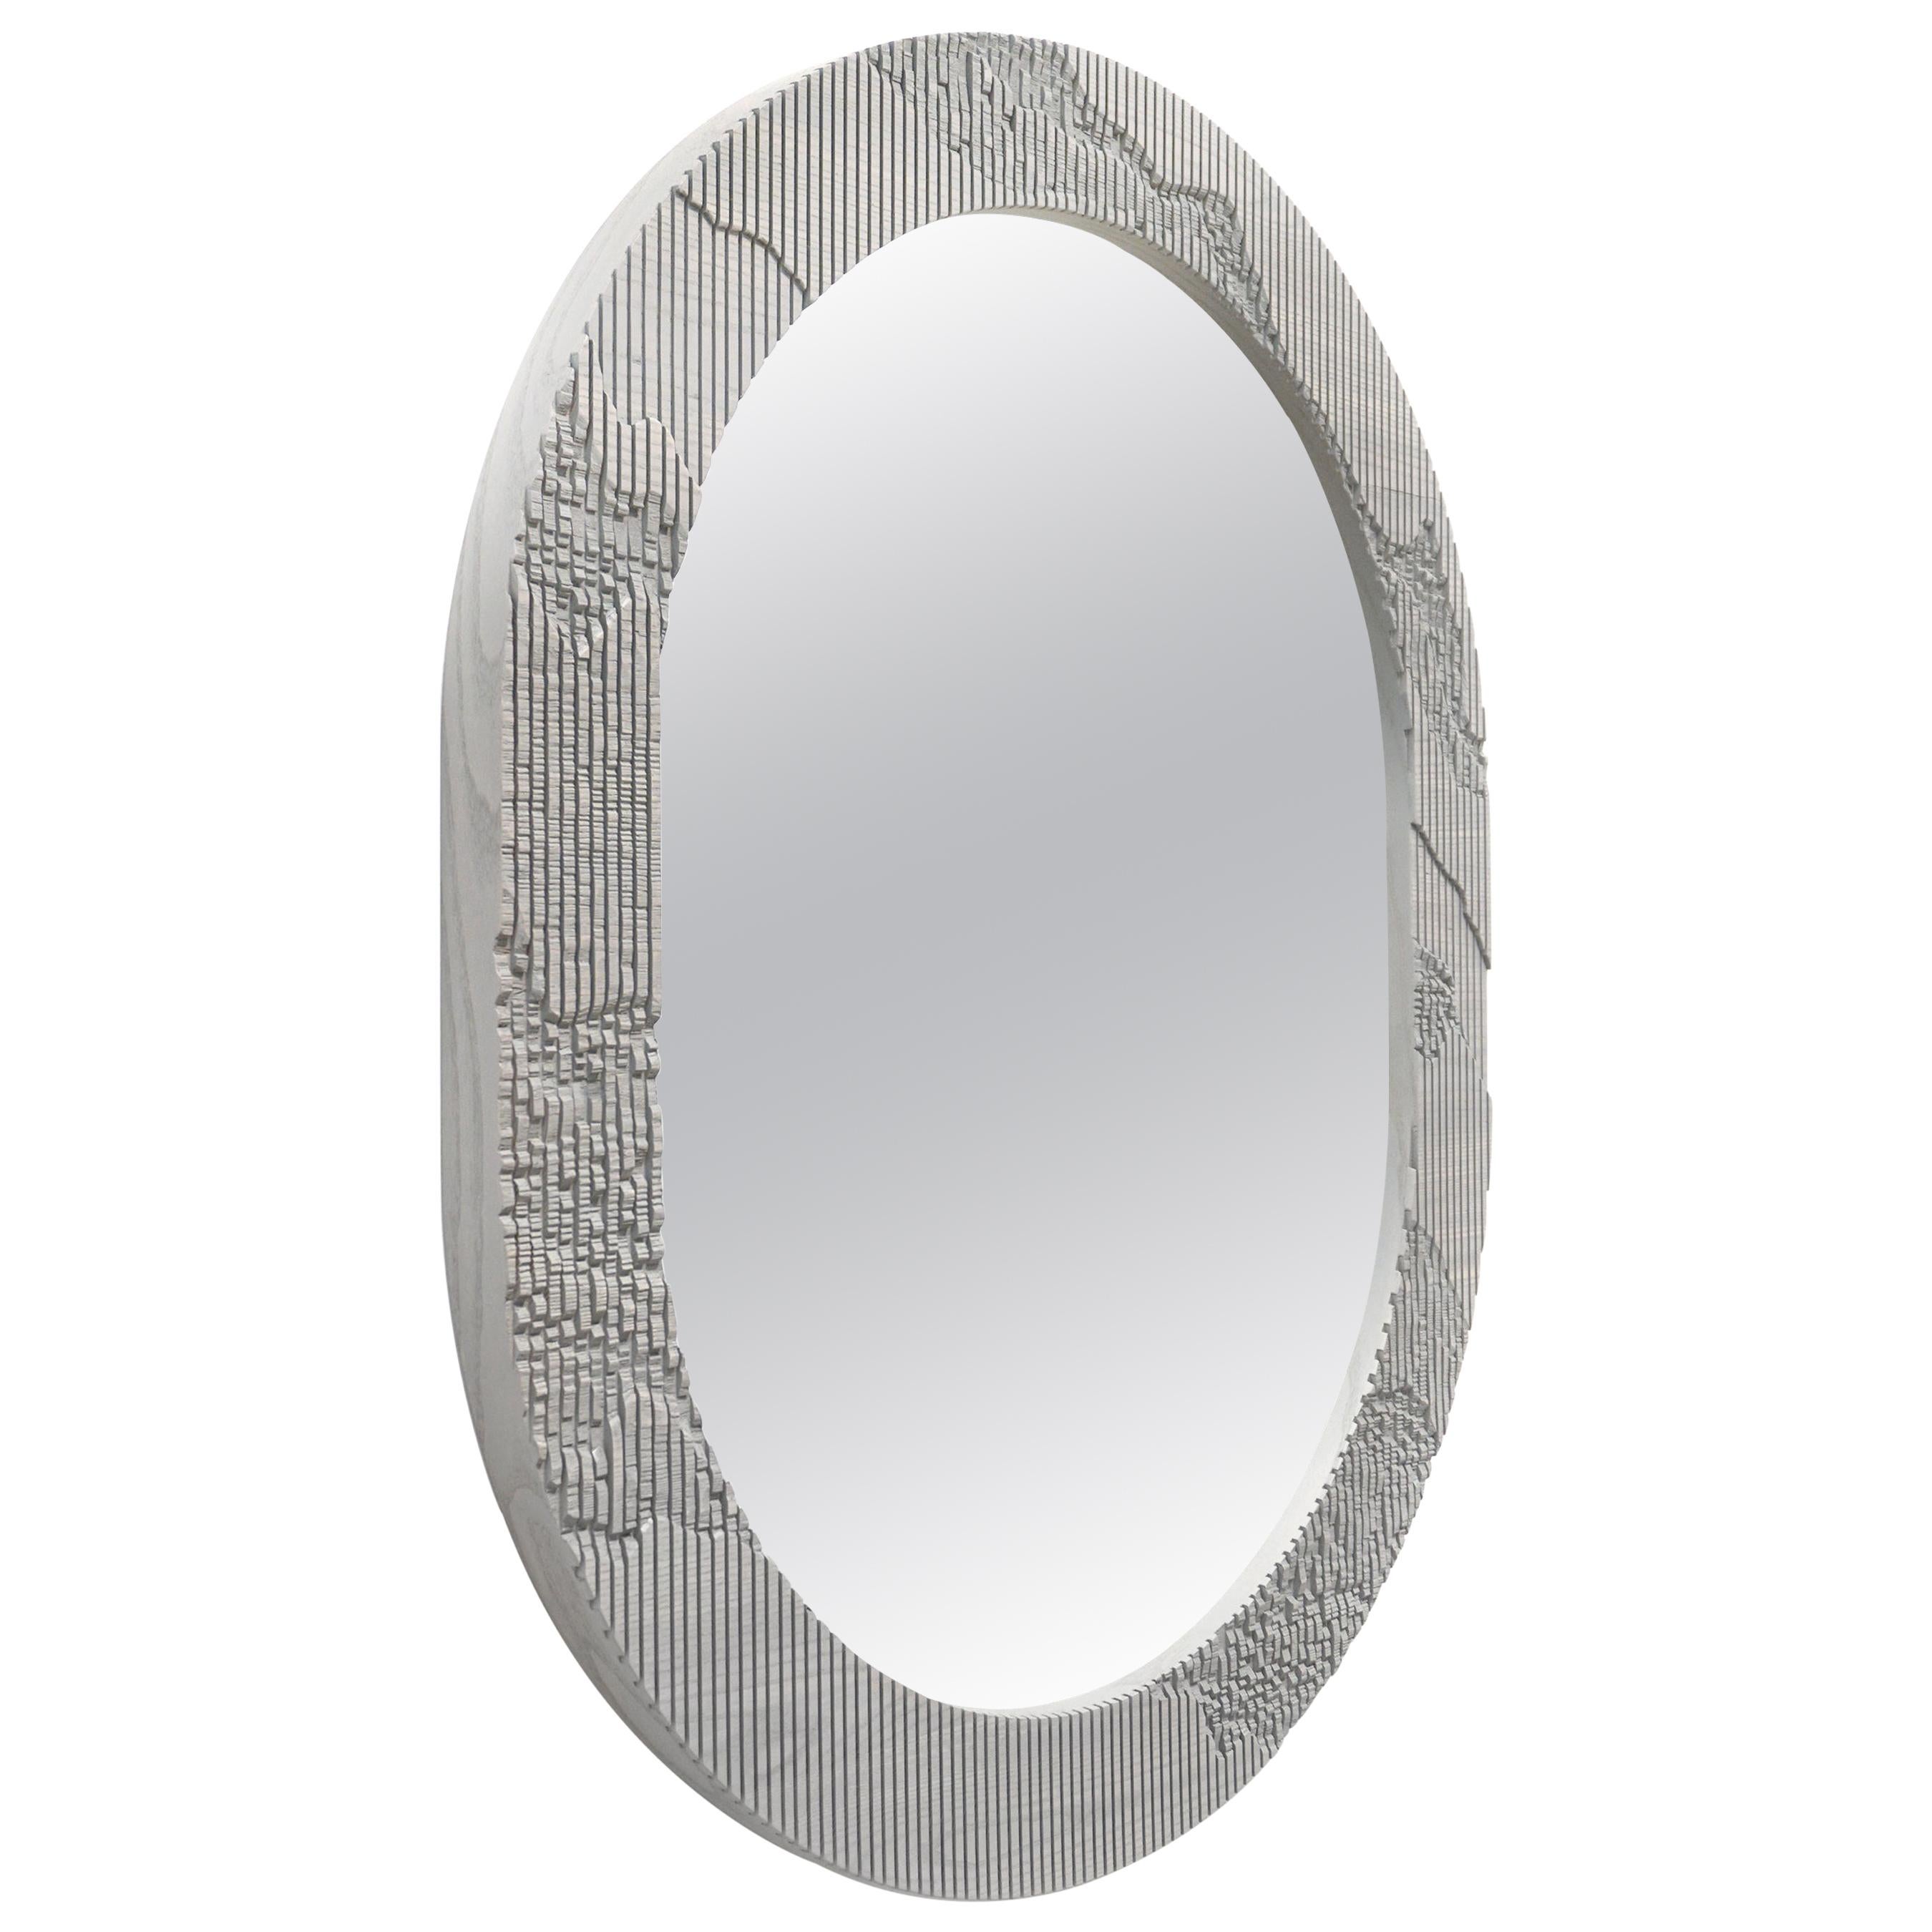 Shale Mirror in Grey by Simon Johns